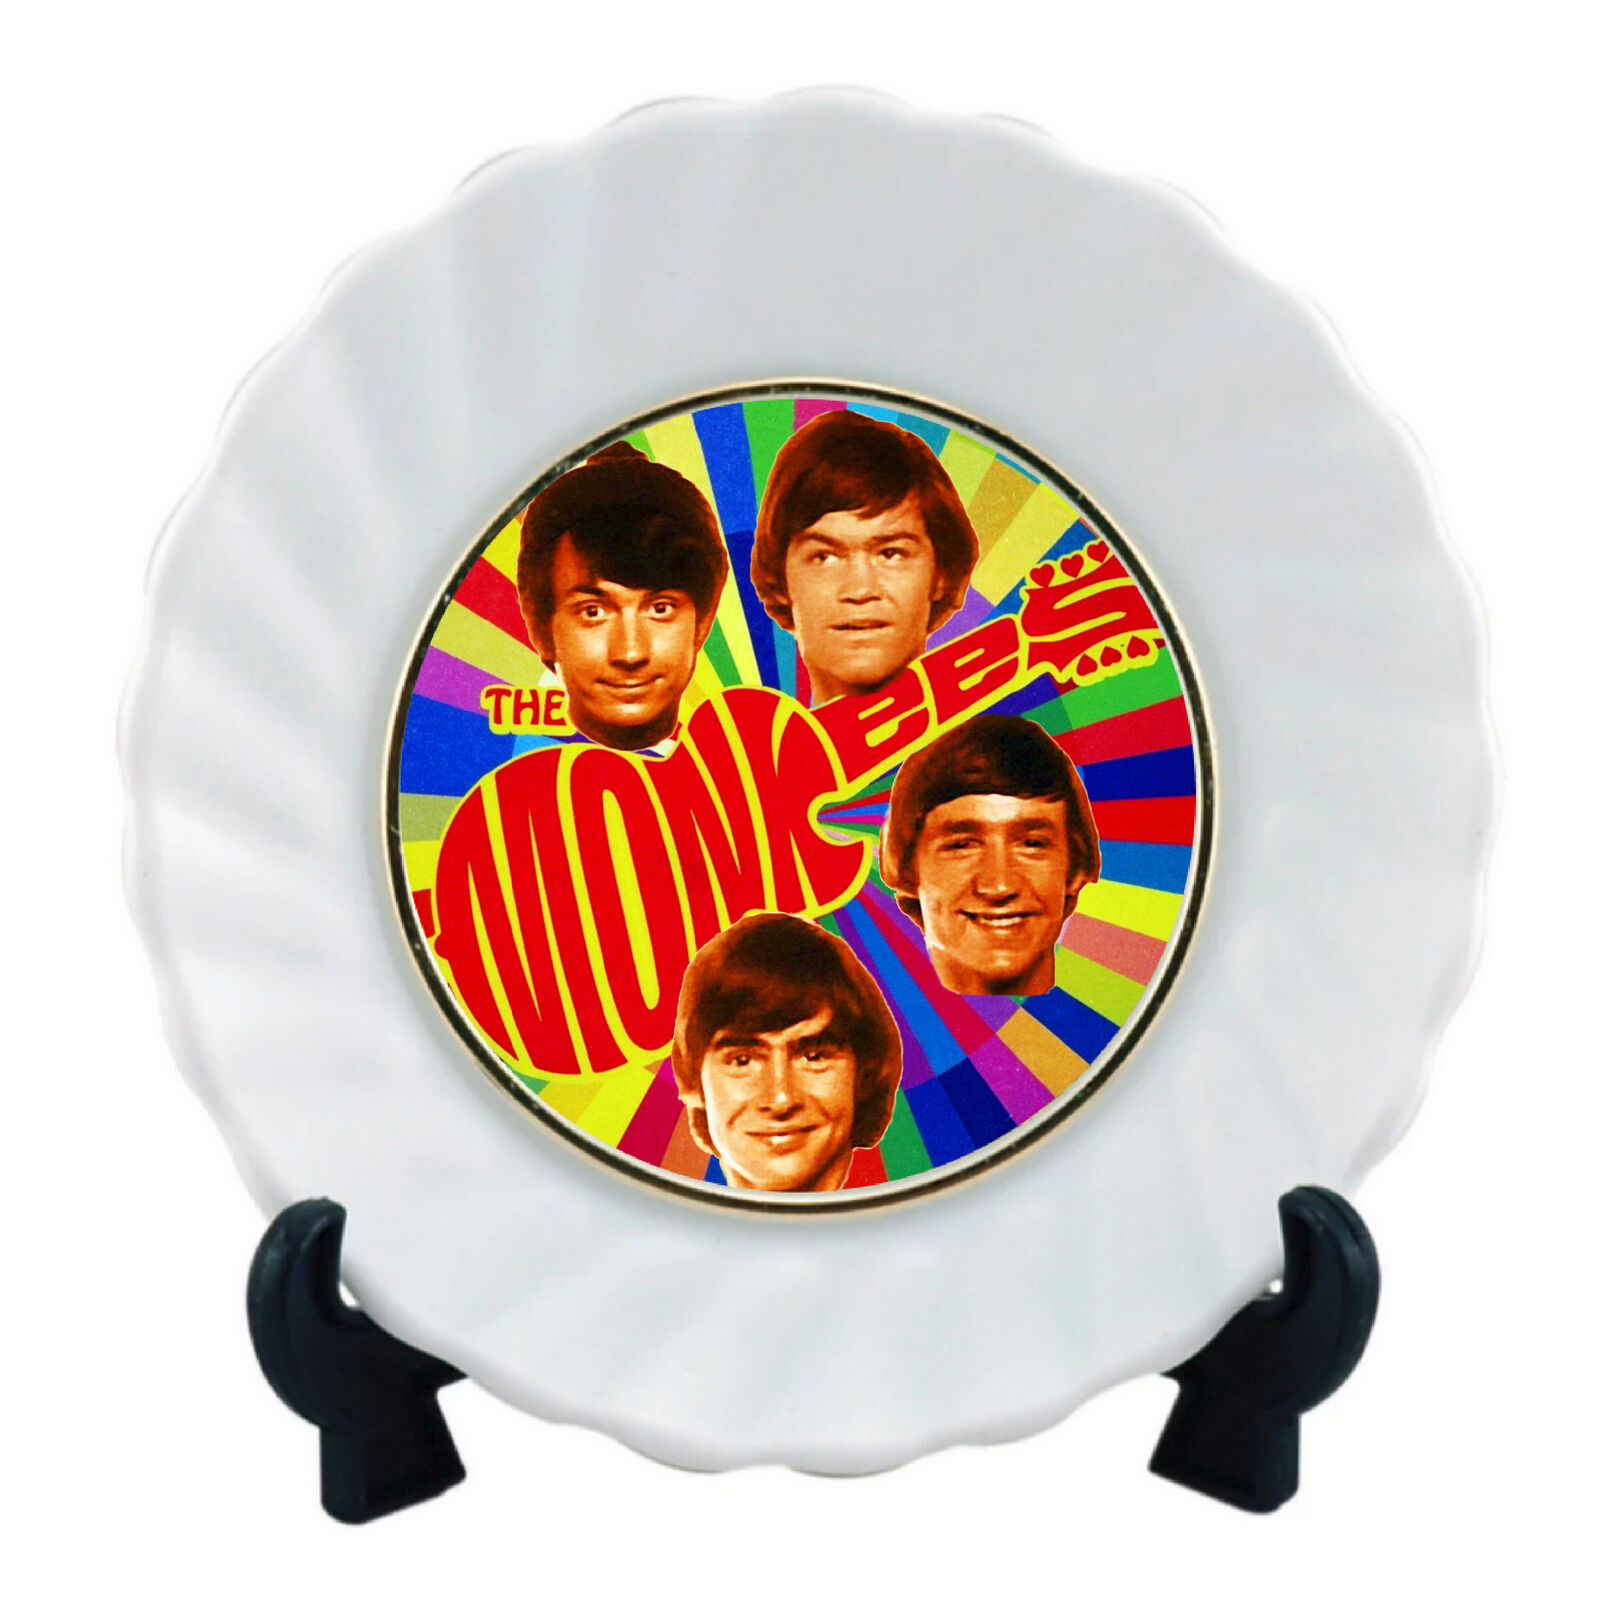 The Monkees Ceramic Plate Limited Edition Numbered with FREE stand